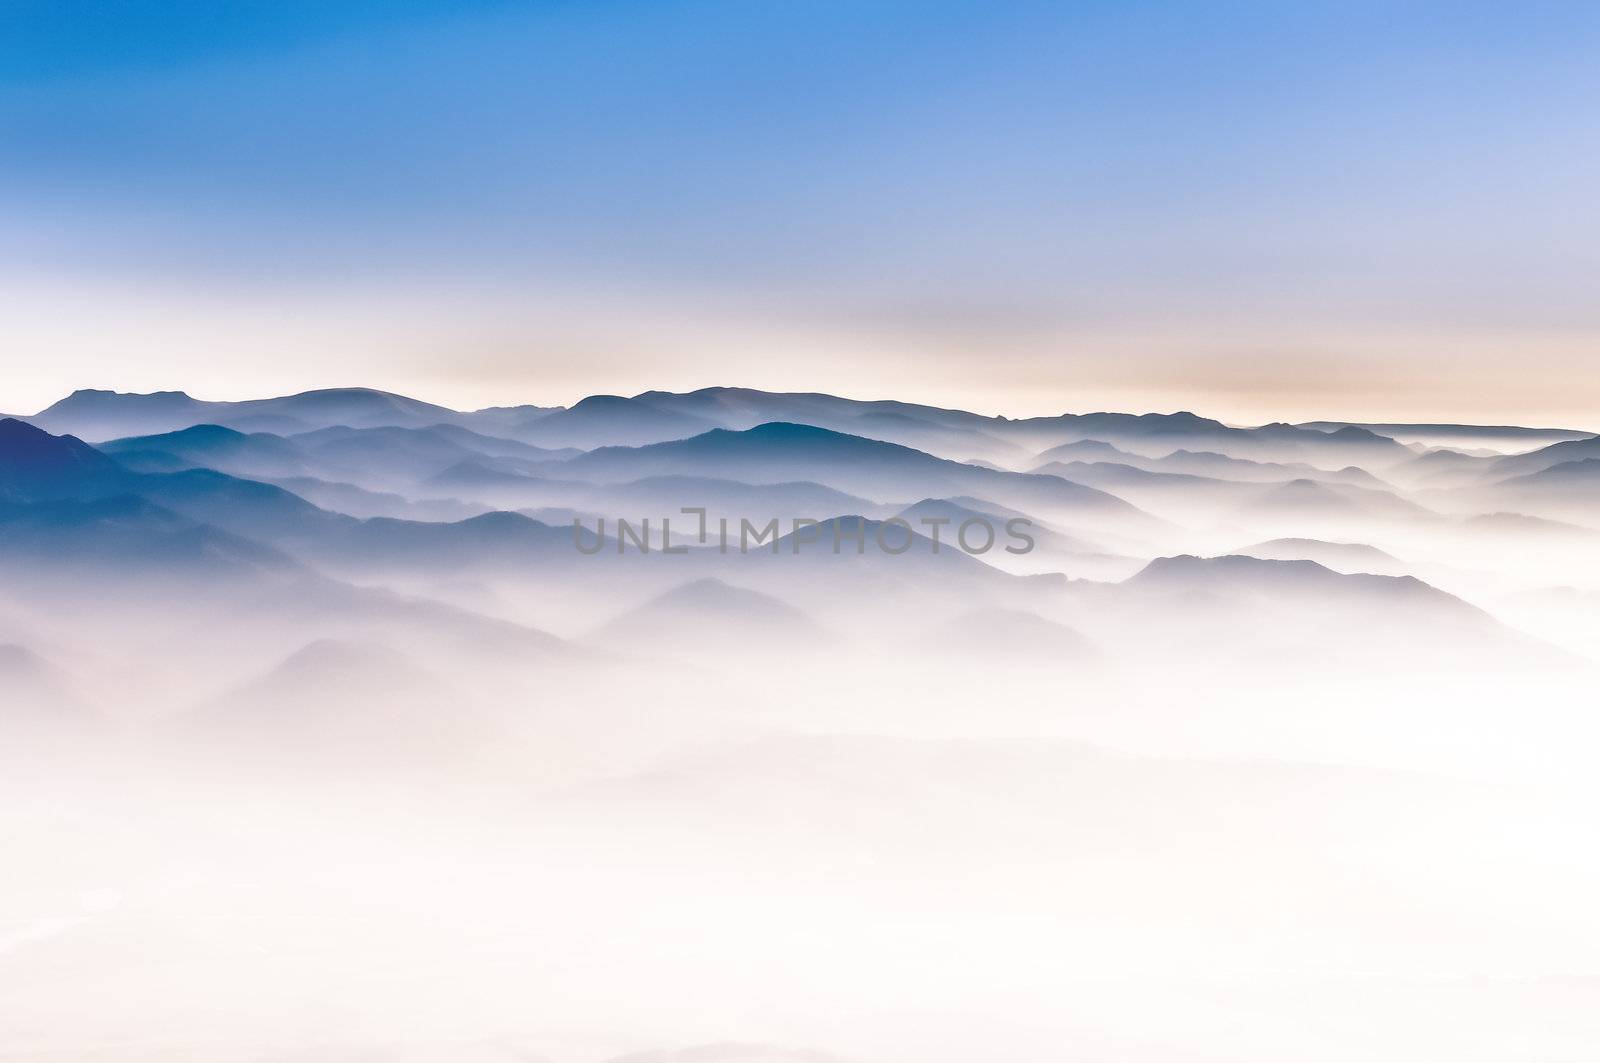 Misty mountain hills landscape detail view by martinm303